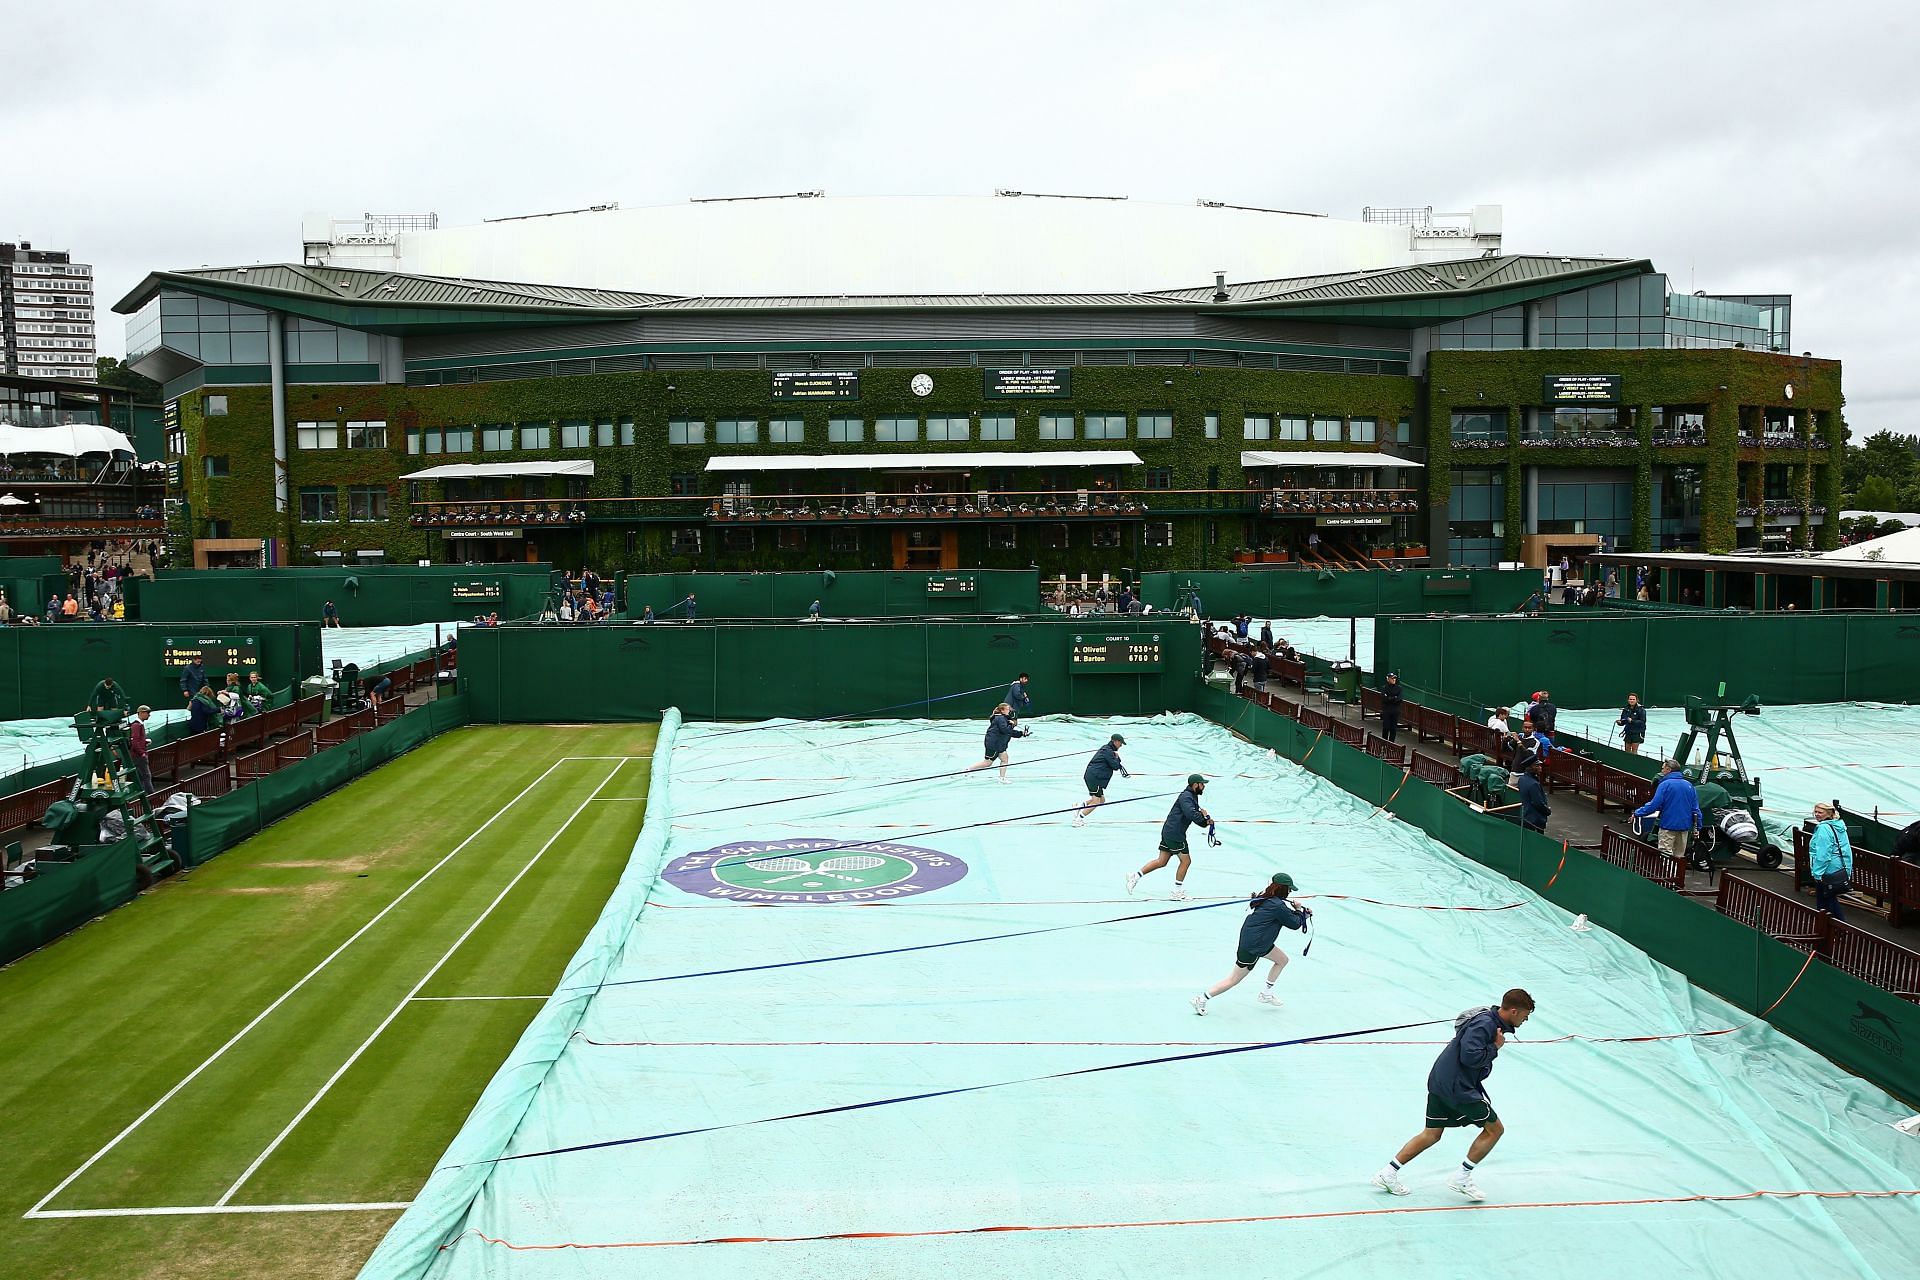 The Wimbledon Championships has often struggles with rain delays over the years.